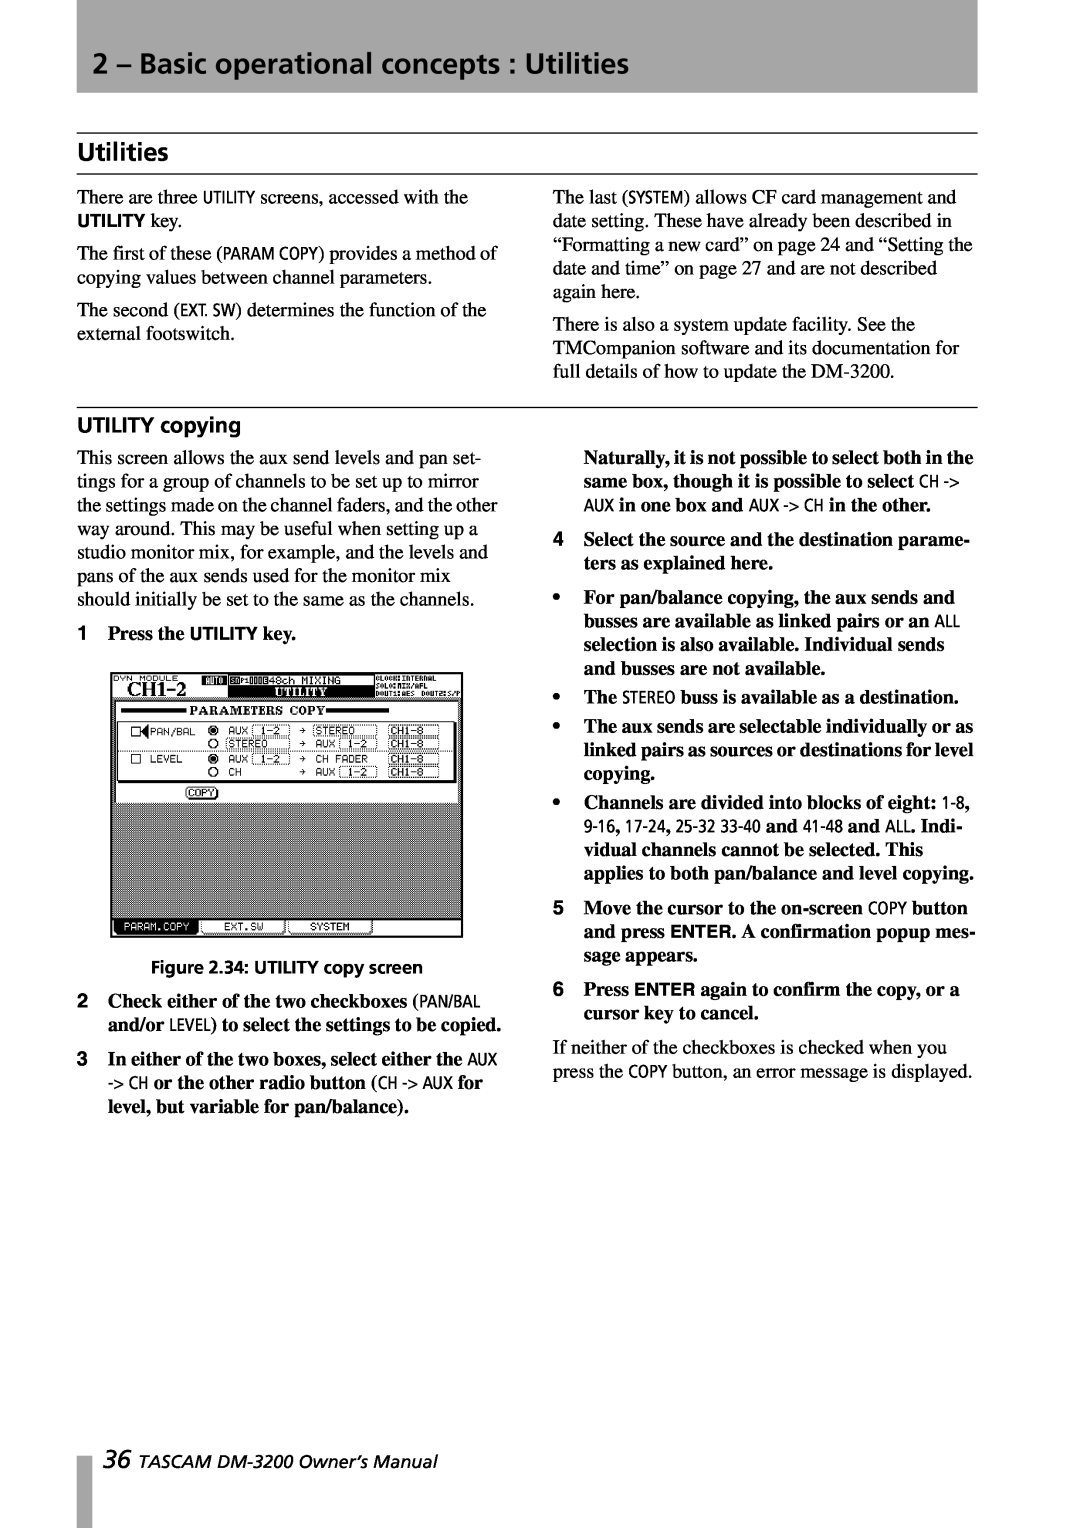 Tascam DM-3200 owner manual 2 – Basic operational concepts : Utilities, UTILITY copying 